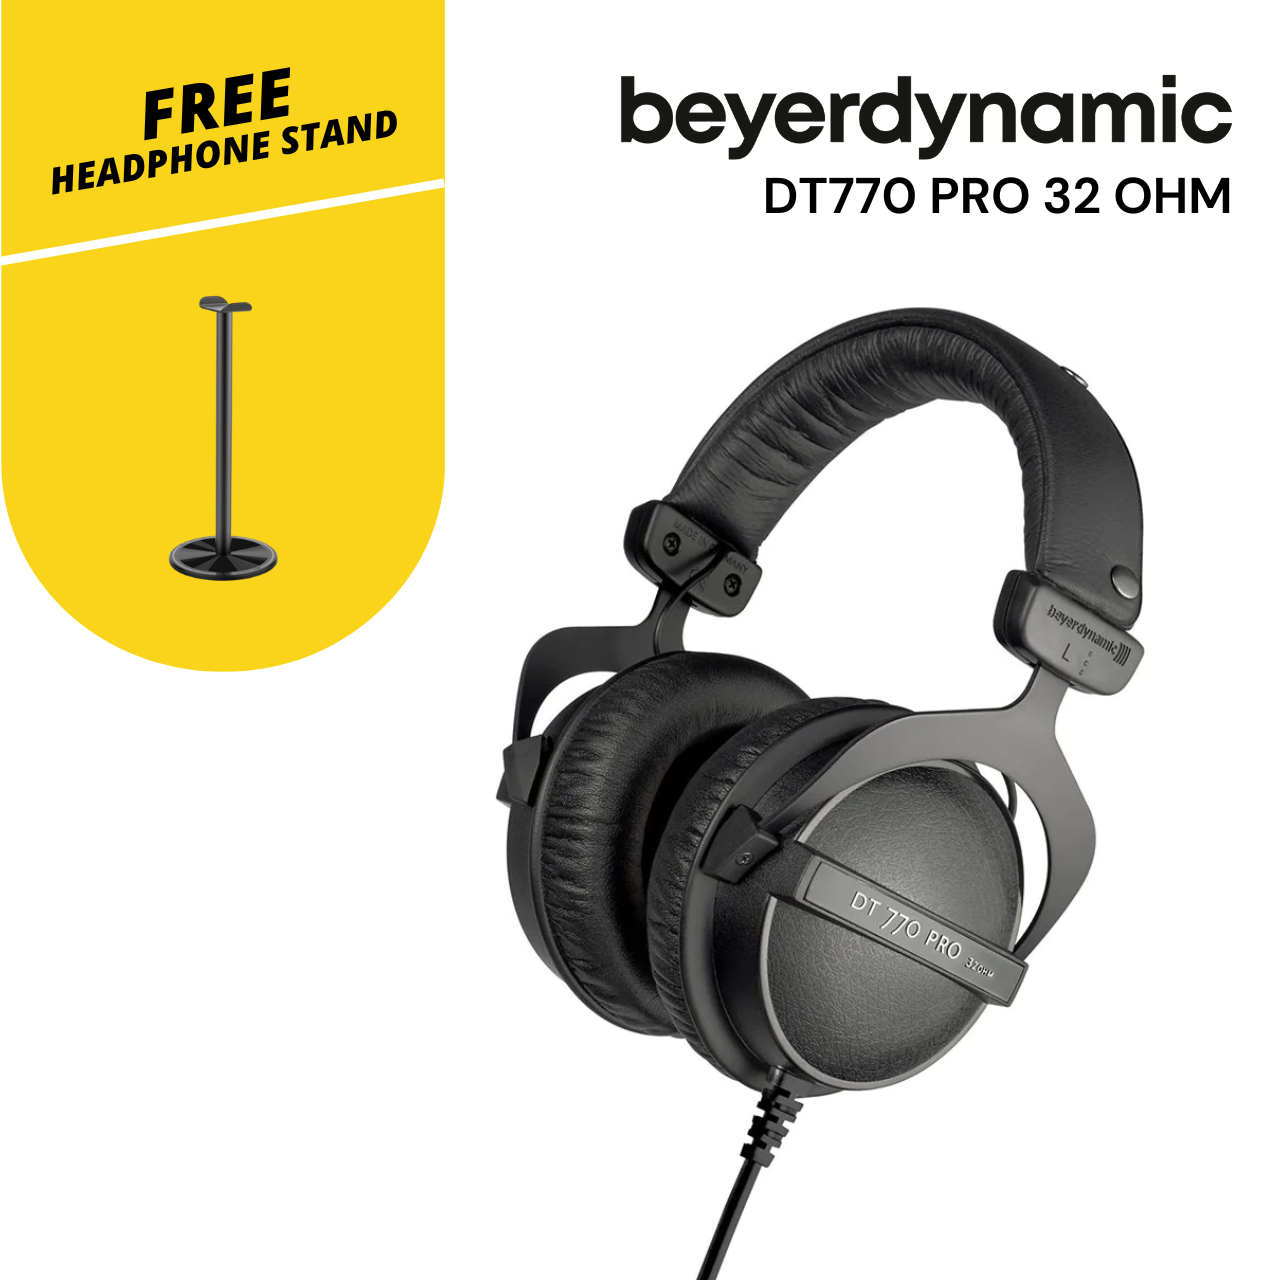 BEYERDYNAMIC DT770 PRO 32 OHMS REFERENCE HEADPHONE FOR CONTROL & MONITORING PURPOSE CLOSED BACK